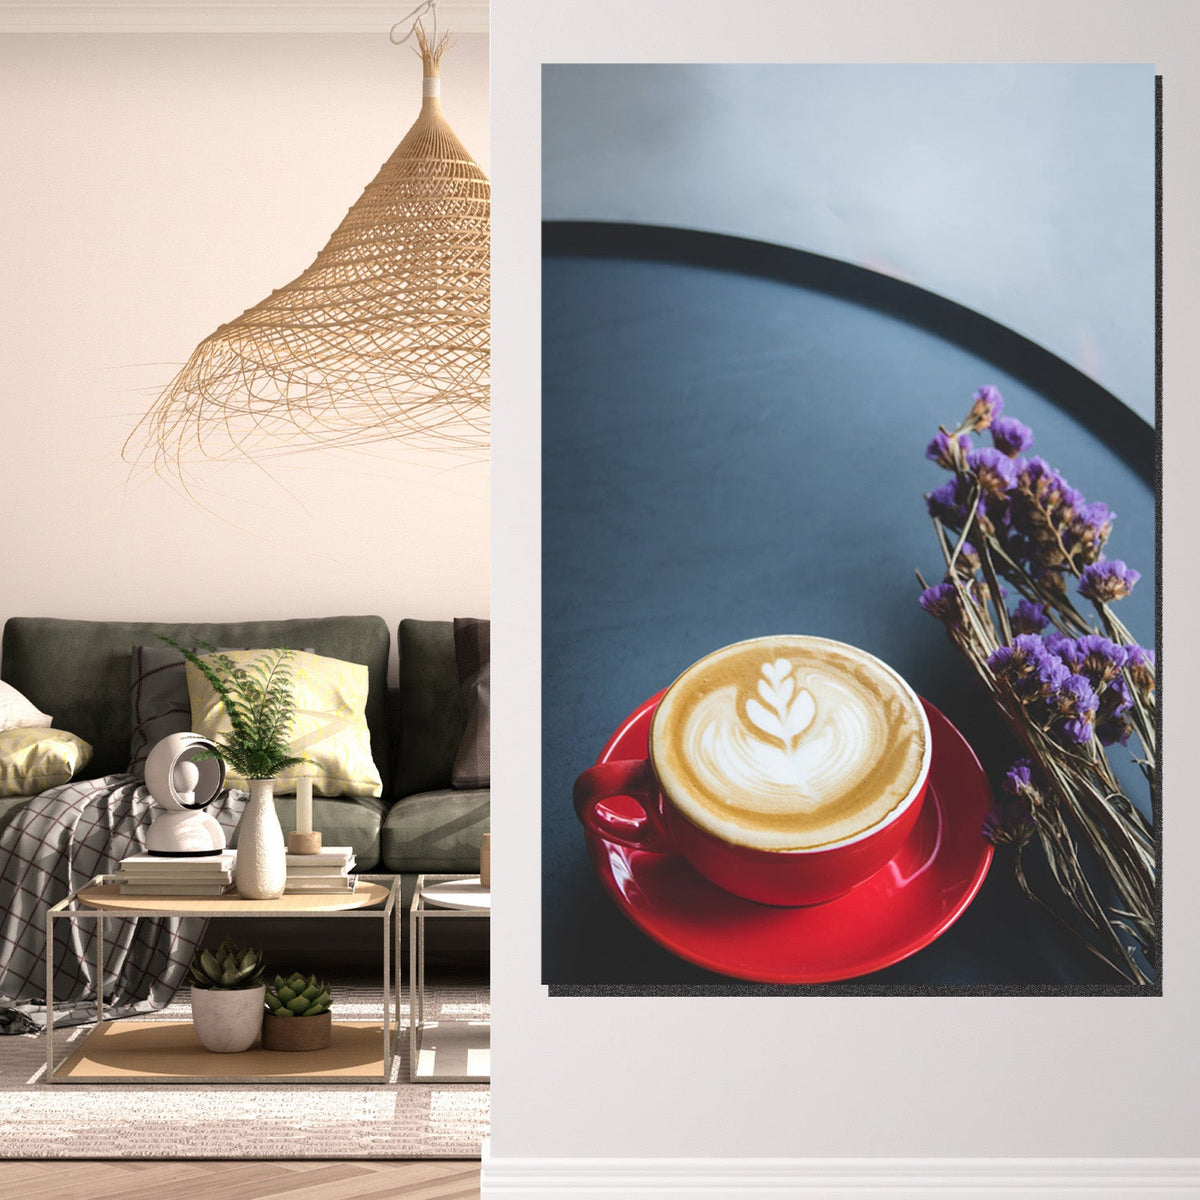 https://cdn.shopify.com/s/files/1/0387/9986/8044/products/CoffeeinaRedCupCanvasArtprintStretched-3.jpg